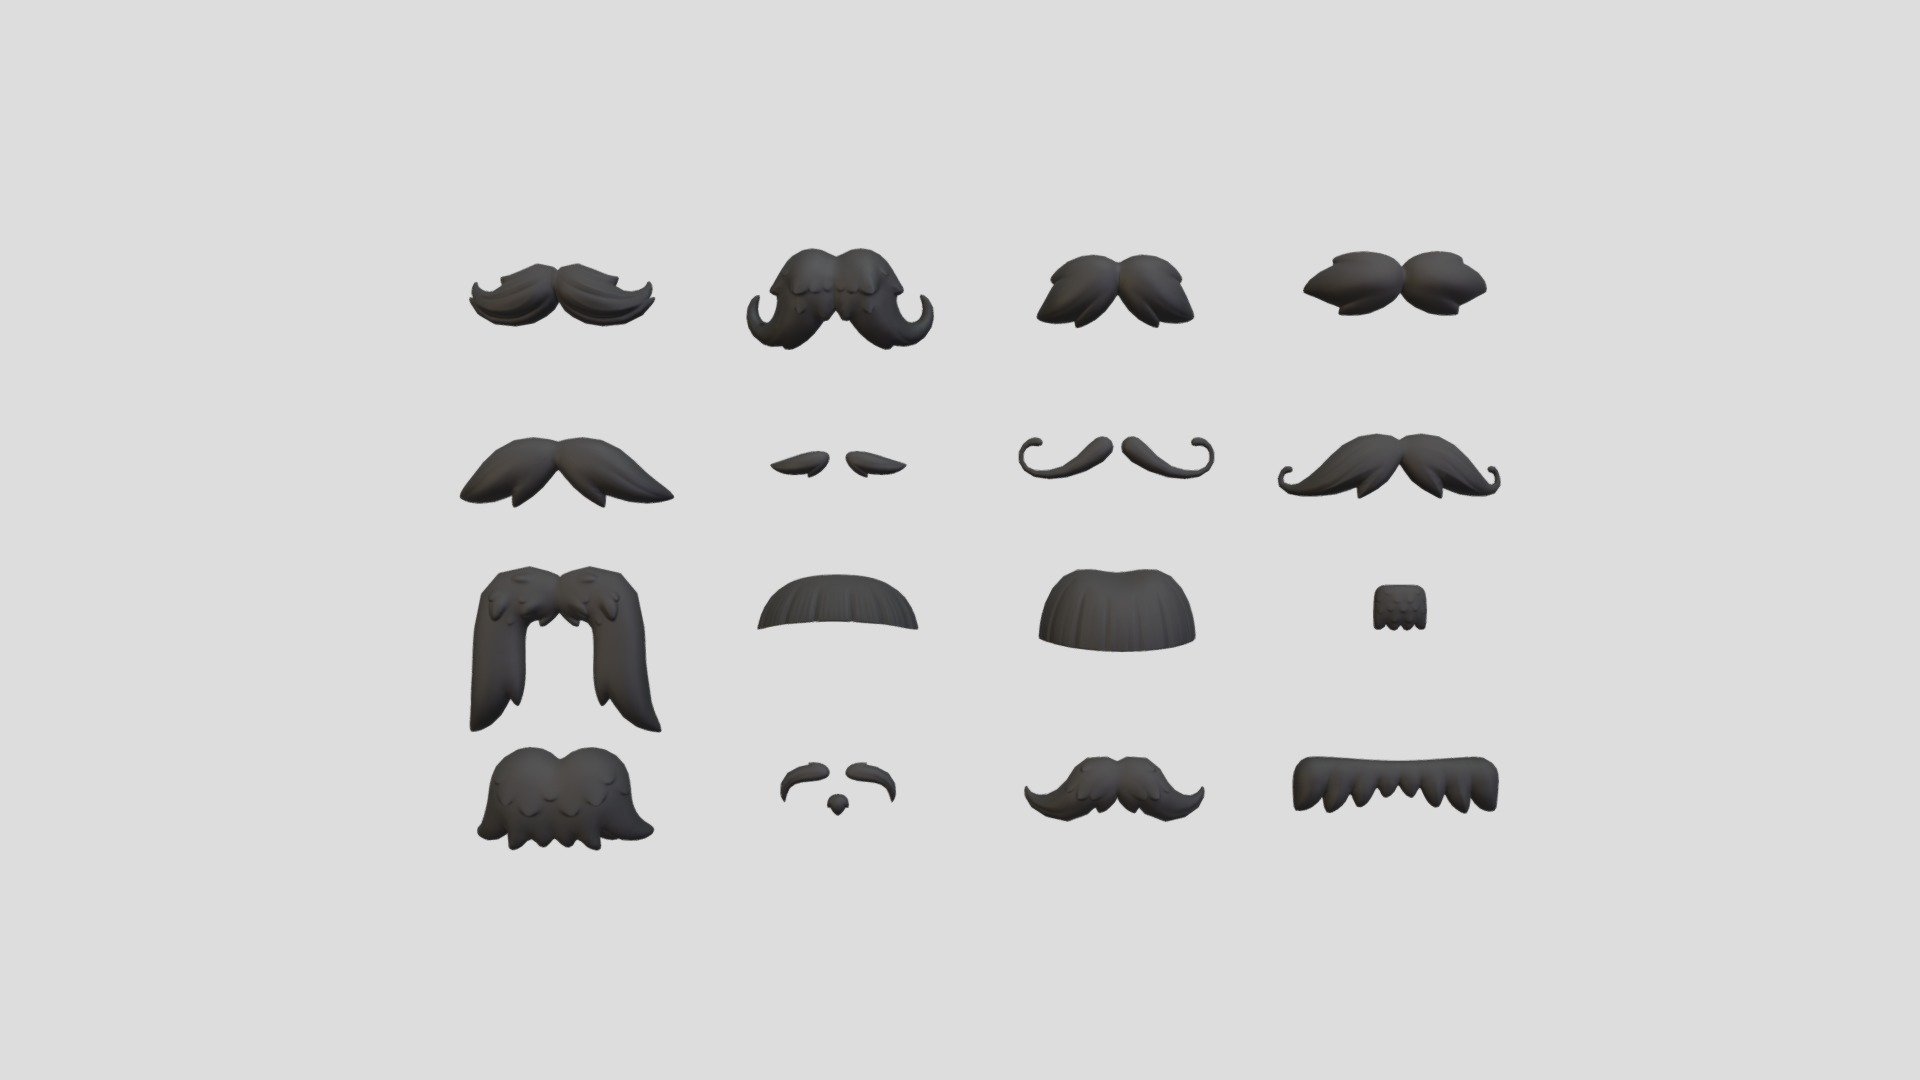 Mustache 3d model pack.      
 
16 models.
3ds max 2020 , FBX and OBJ files    
 


Clean topology                      

Non-Overlap UVs                     
 


Textures include                     

- Base Color                        

- Normal                            

- Roughness                         



2048x2048 PNG texture               
 


Mustache01  412 poly 

Mustache02  686 poly 

Mustache03  734 poly 

Mustache04  682 poly 

Mustache05  534 poly 

Mustache06  720 poly 

Mustache07  440 poly 

Mustache08  578 poly 

Mustache09  864 poly 

Mustache10  700 poly 

Mustache11  606 poly 

Mustache12  260 poly 

Mustache13  922 poly 

Mustache14  930 poly 

Mustache15  522 poly 

Mustache16  734 poly 
 - Mustache Pack - Buy Royalty Free 3D model by bariacg 3d model